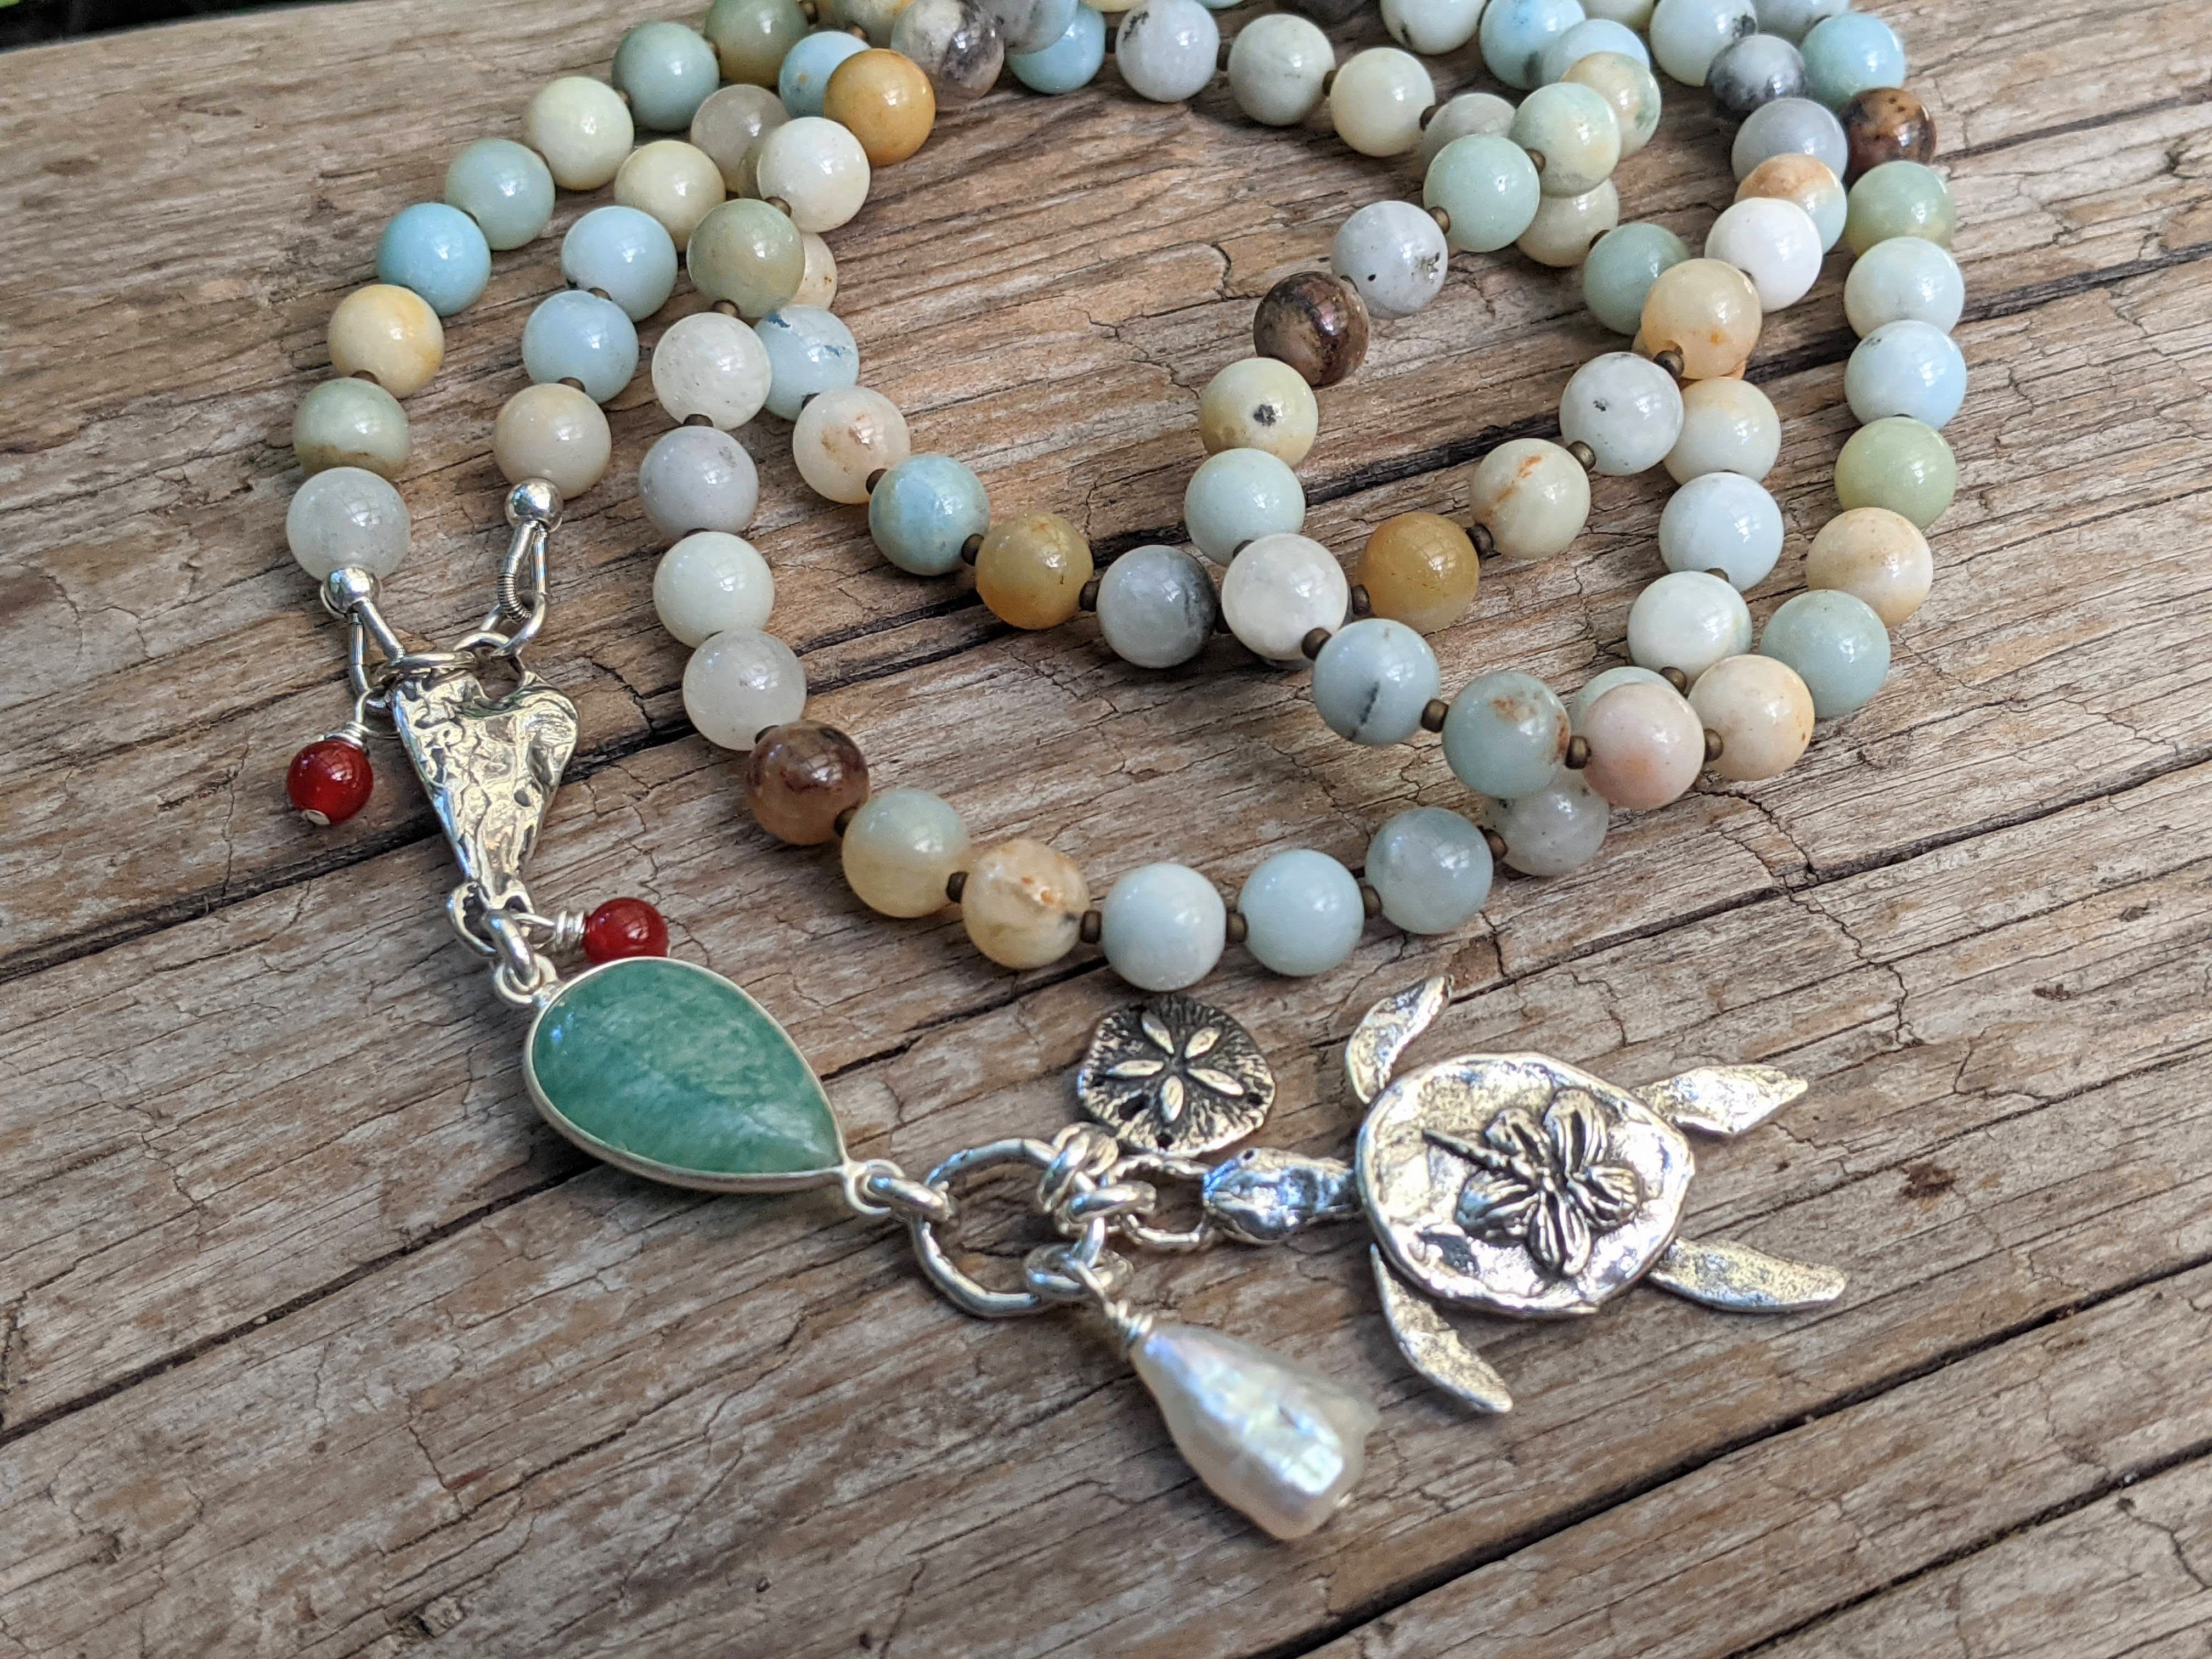 Long Amazonite Necklace with Sand Dollar and Turtle Pendant